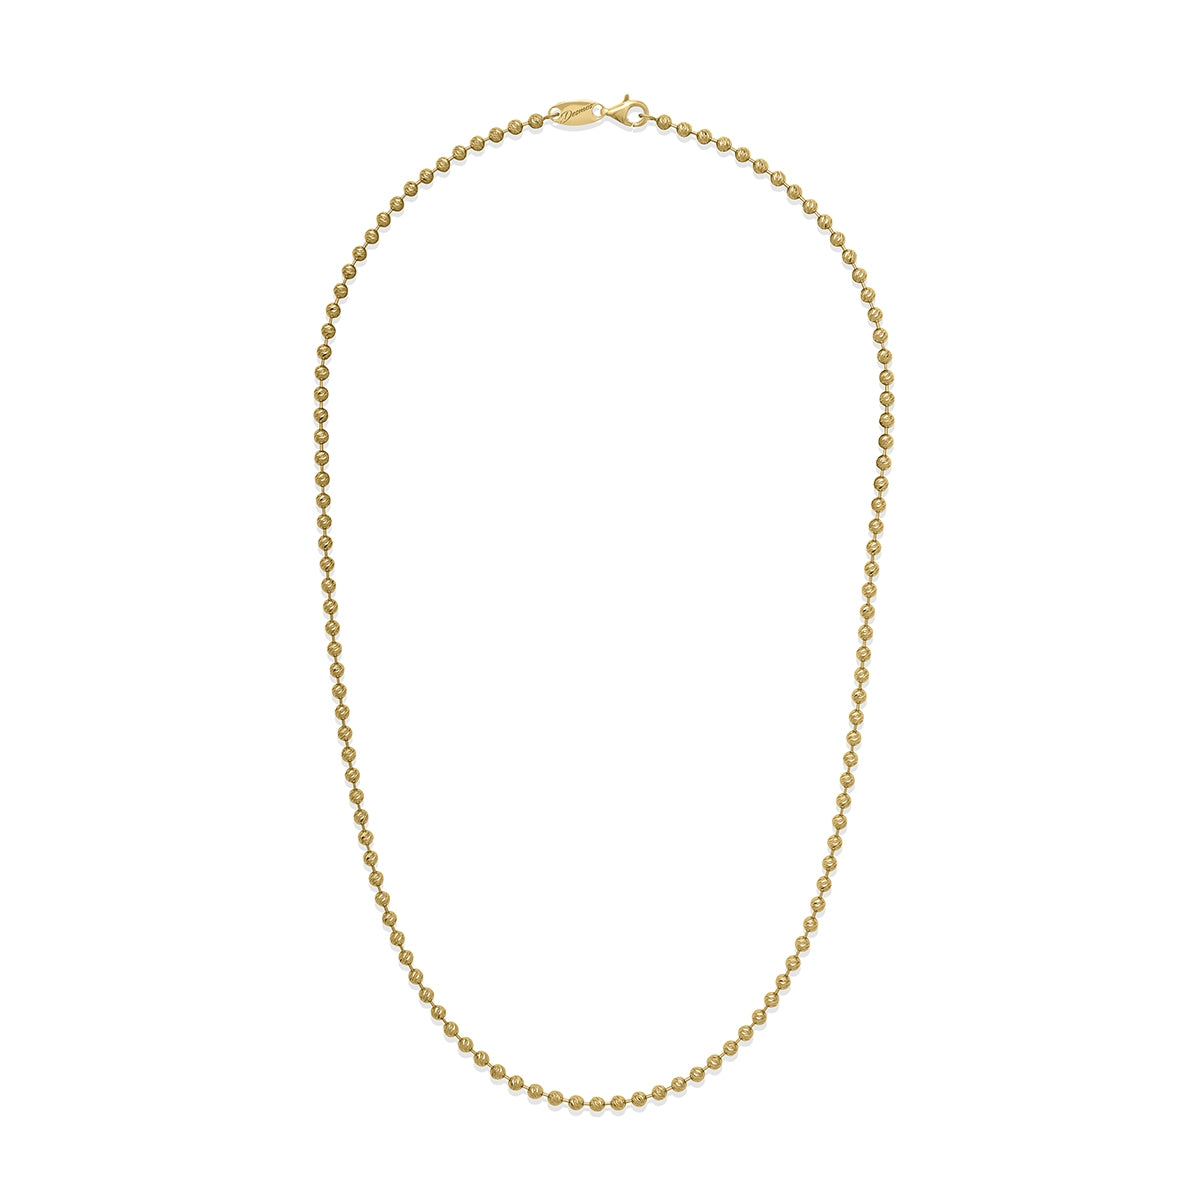 This Desmos Italian collection gold-plated small bead necklace features stylish diamond-cut beads of 3mm and a secure lobster catch. Enjoy the precise design of the necklace, with its 16" length, perfect for adding a sparkle of luxury to any ensemble.